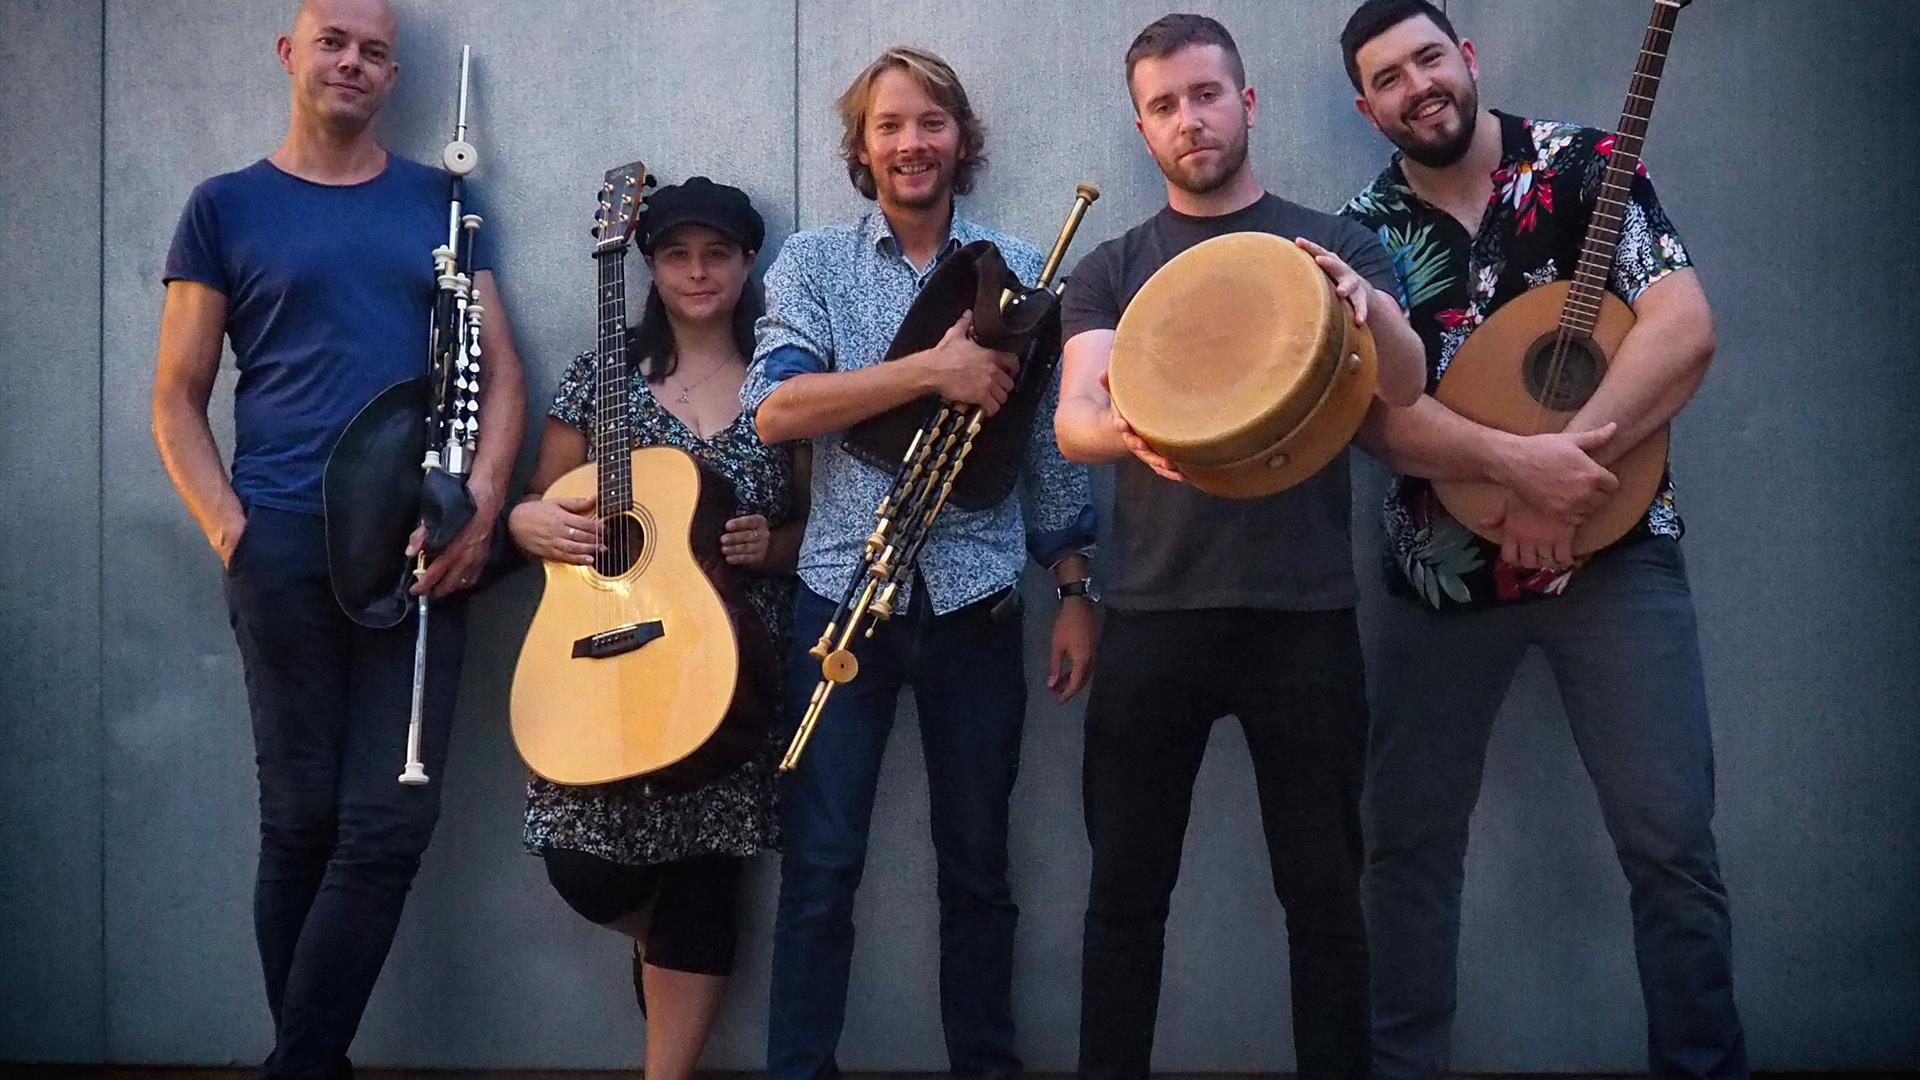 Image shows Realta Band standing outside.  5 members of the band 4 male and 1 female stand with instruments such as guitars and bodhran.